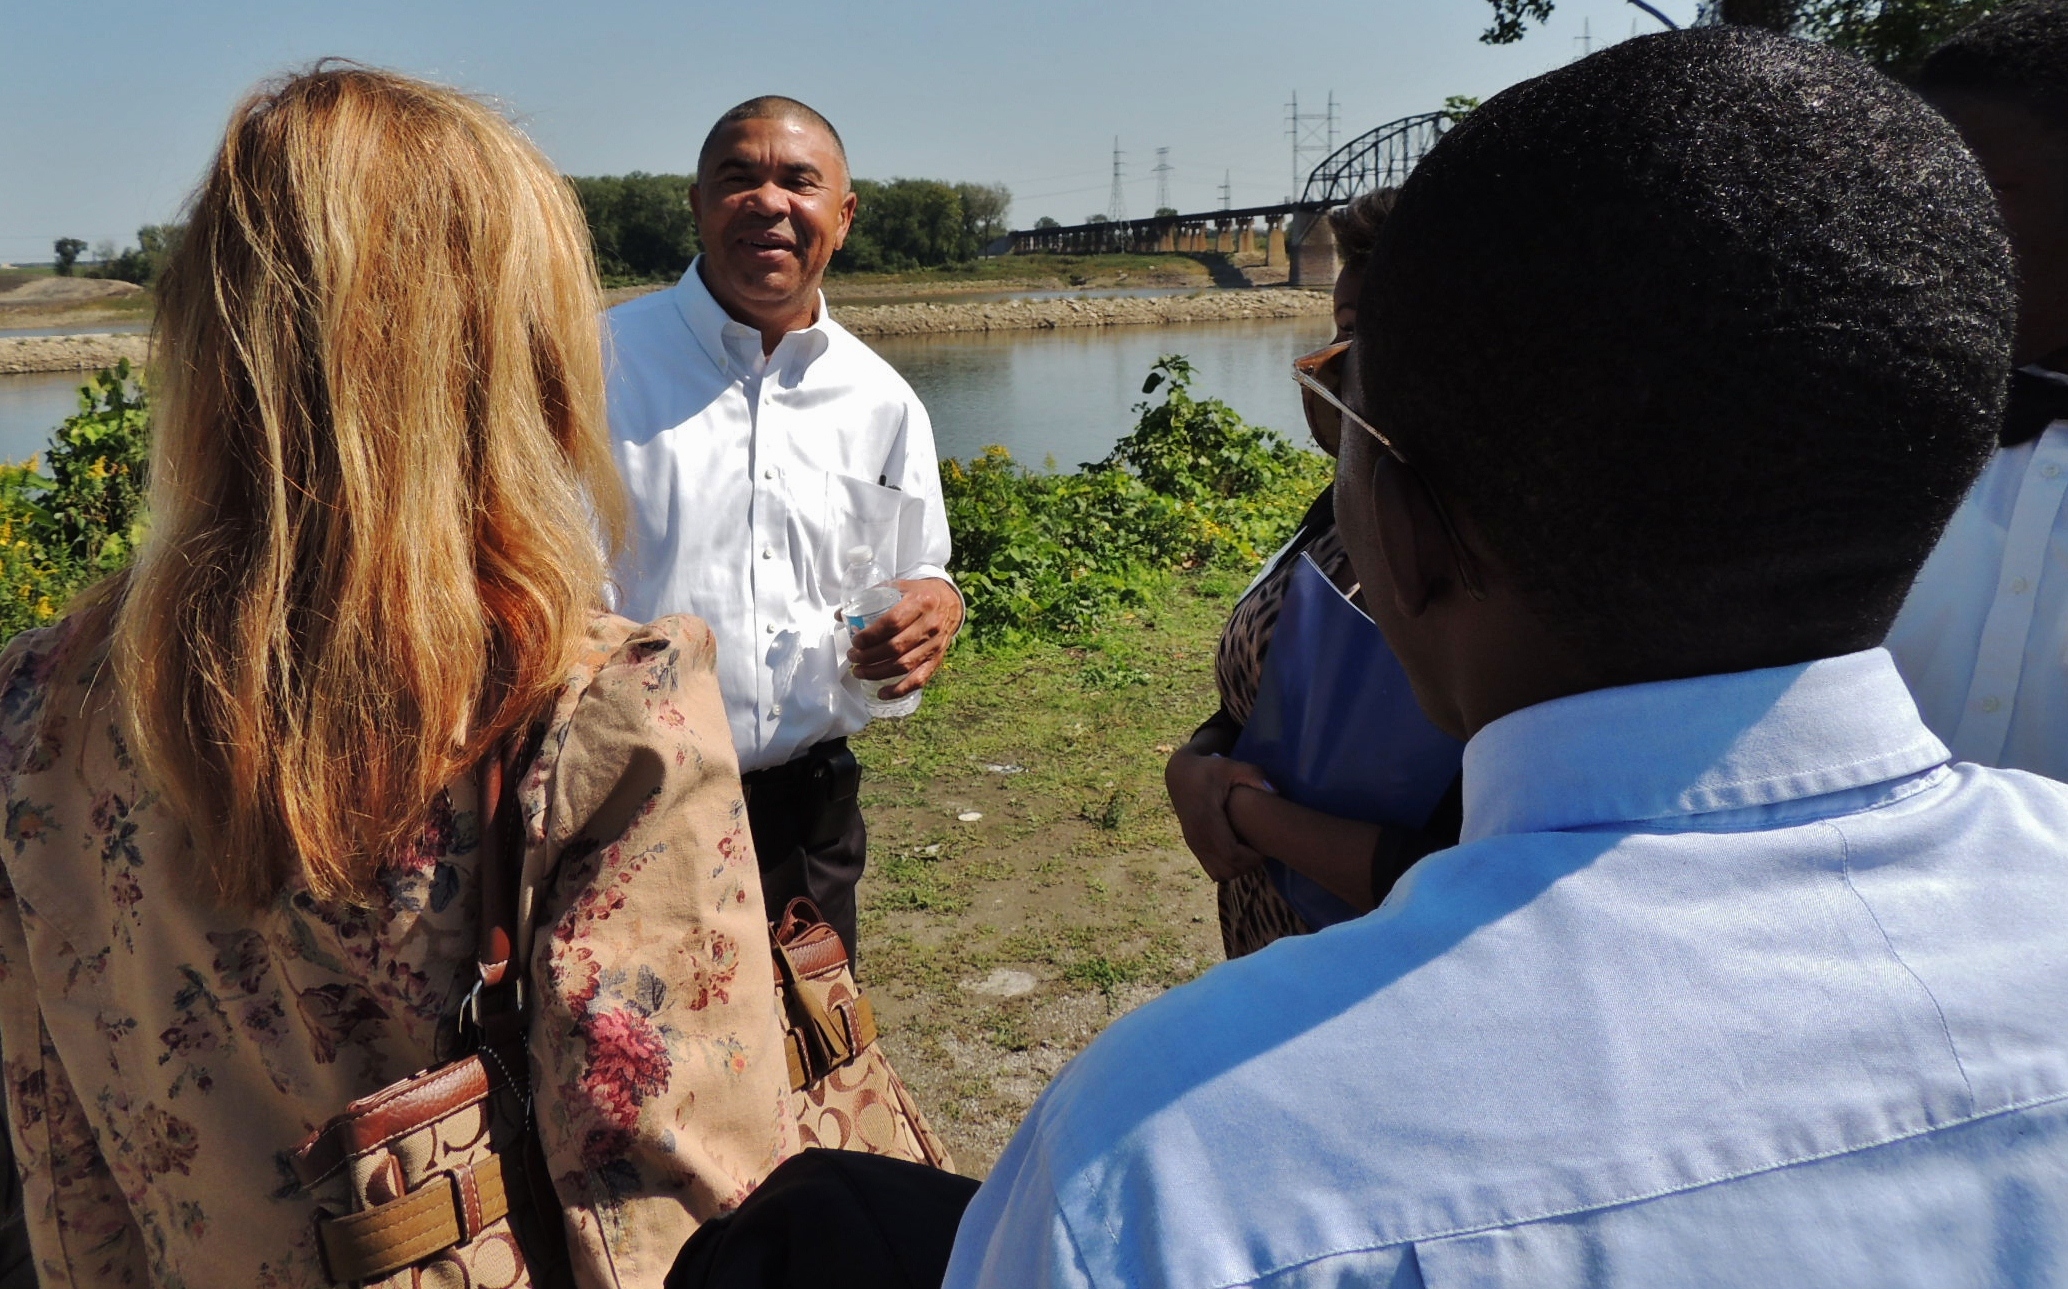 Rep. Clay visits an underground railroad site during the Congressional Conversation on Race 